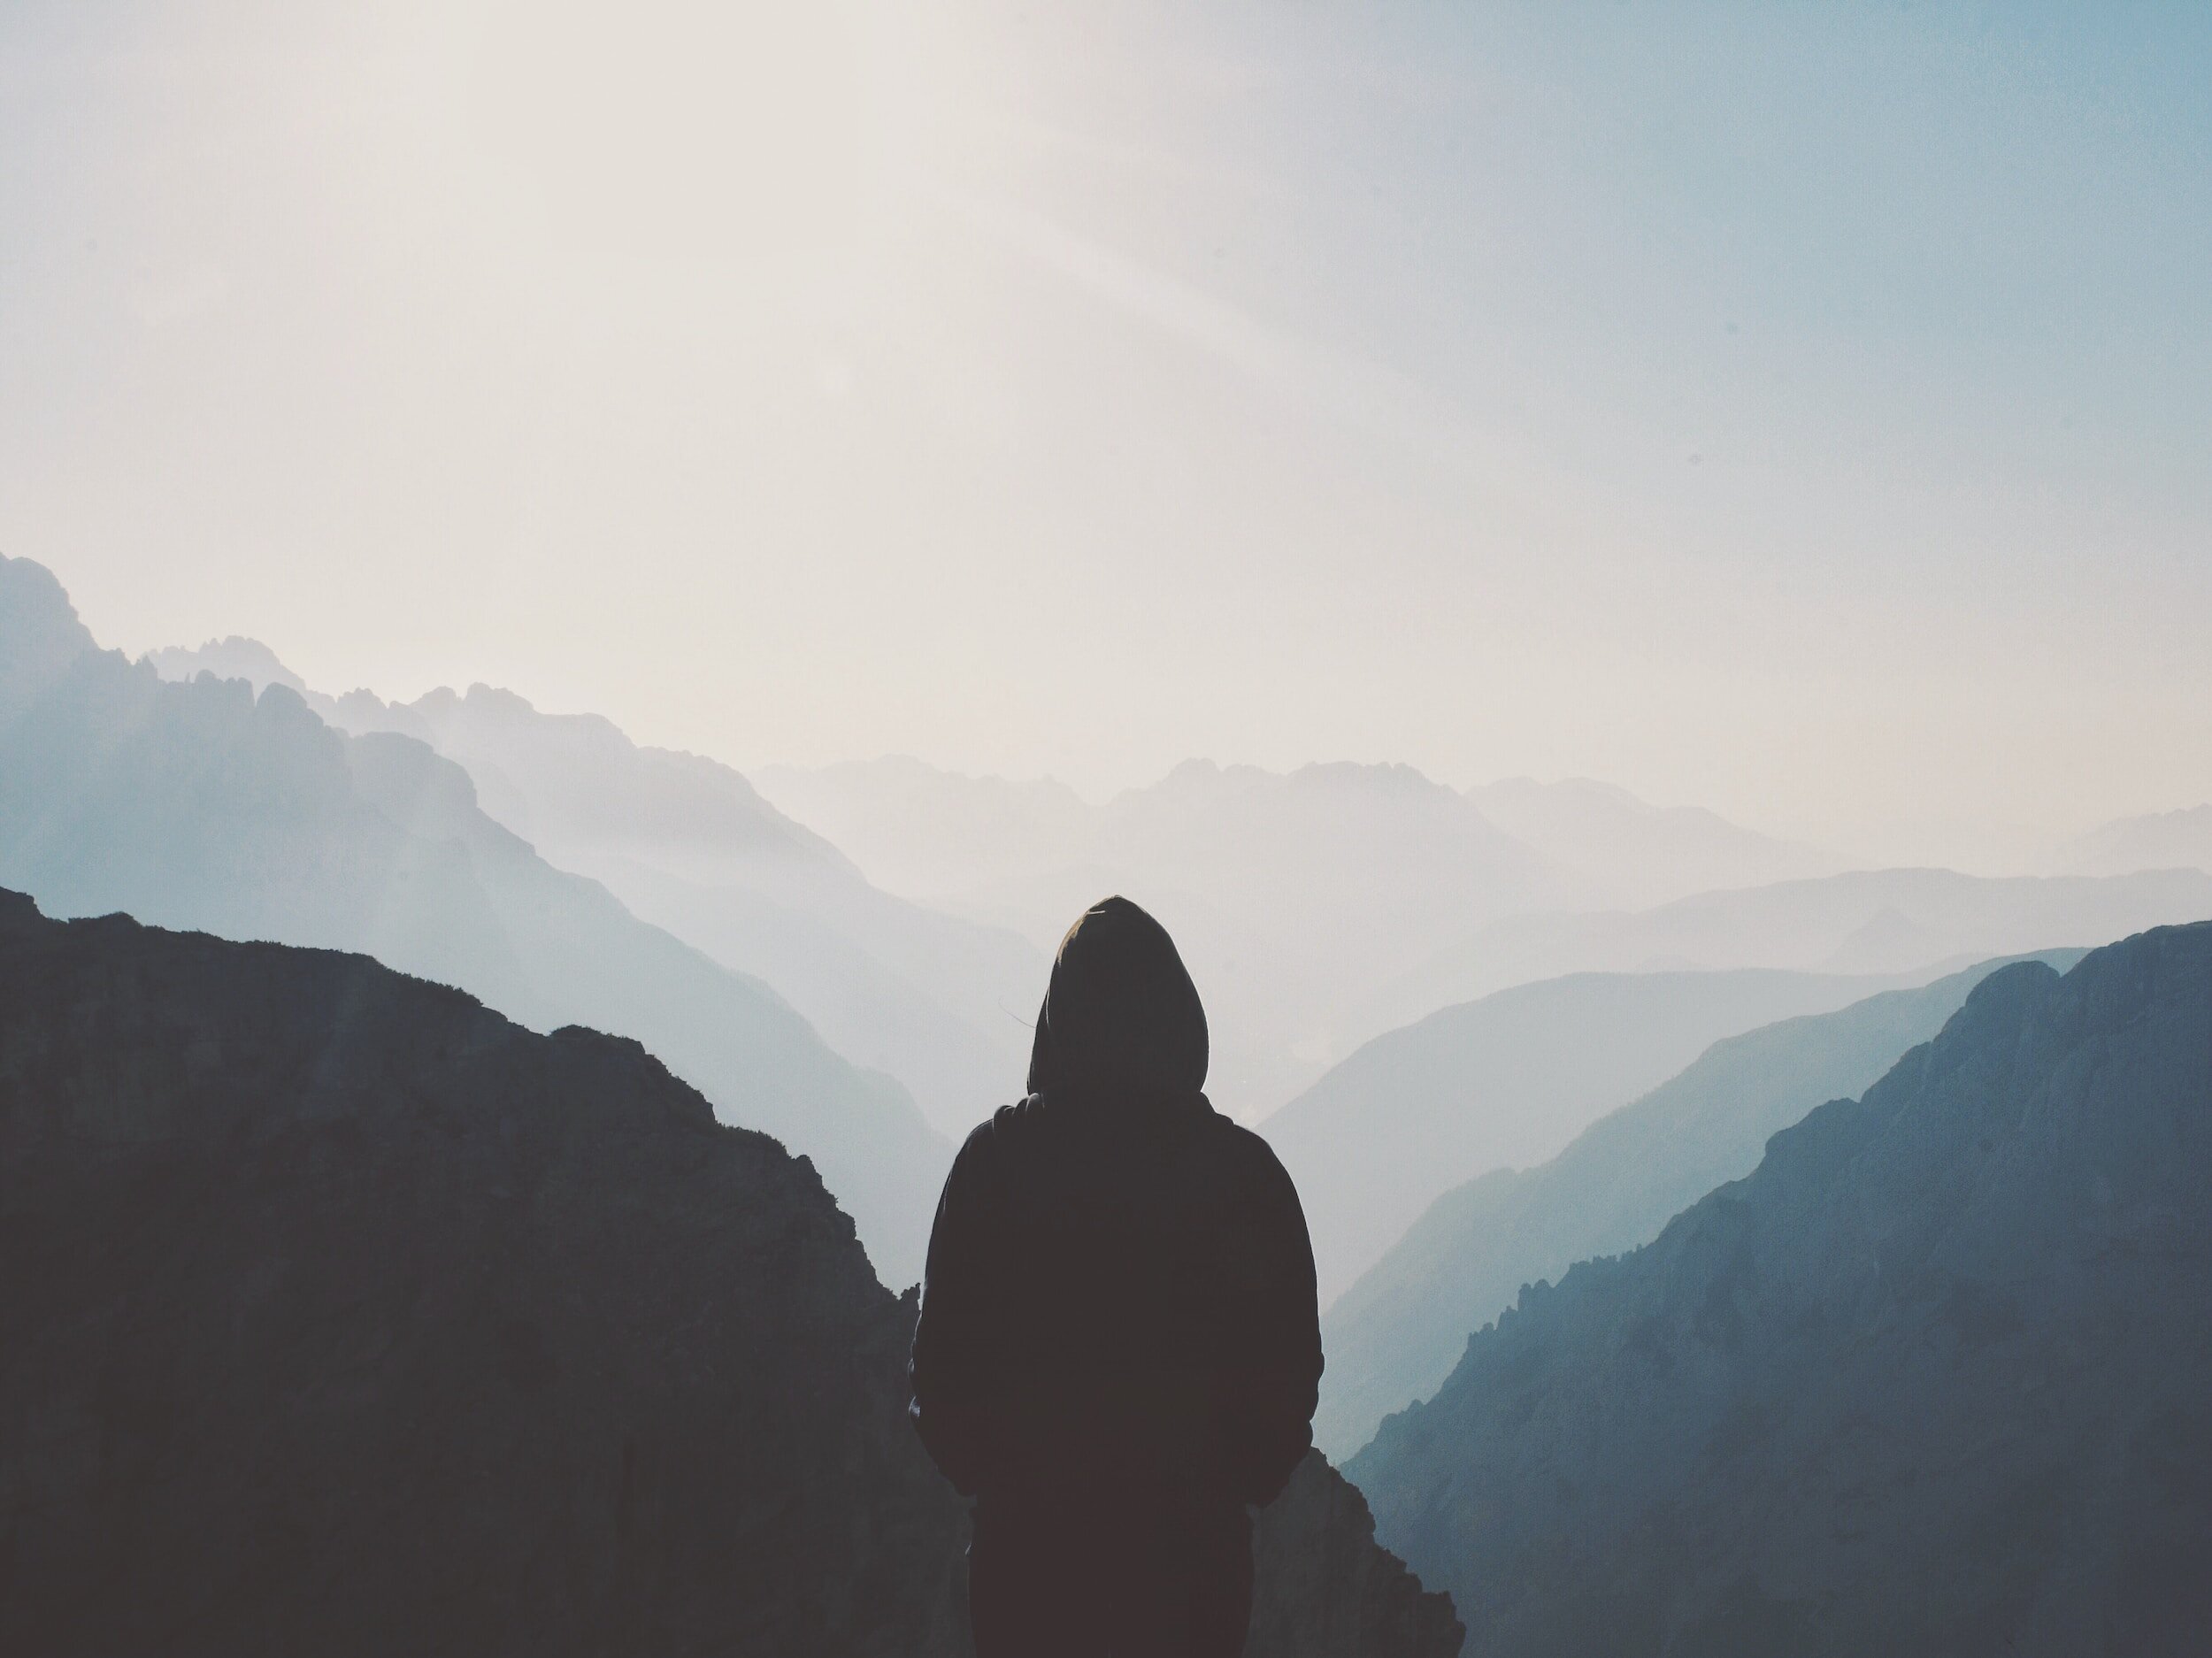 A person wearing a hoodie with their hands in their pockets, gazing at the sunny, misty mountains.